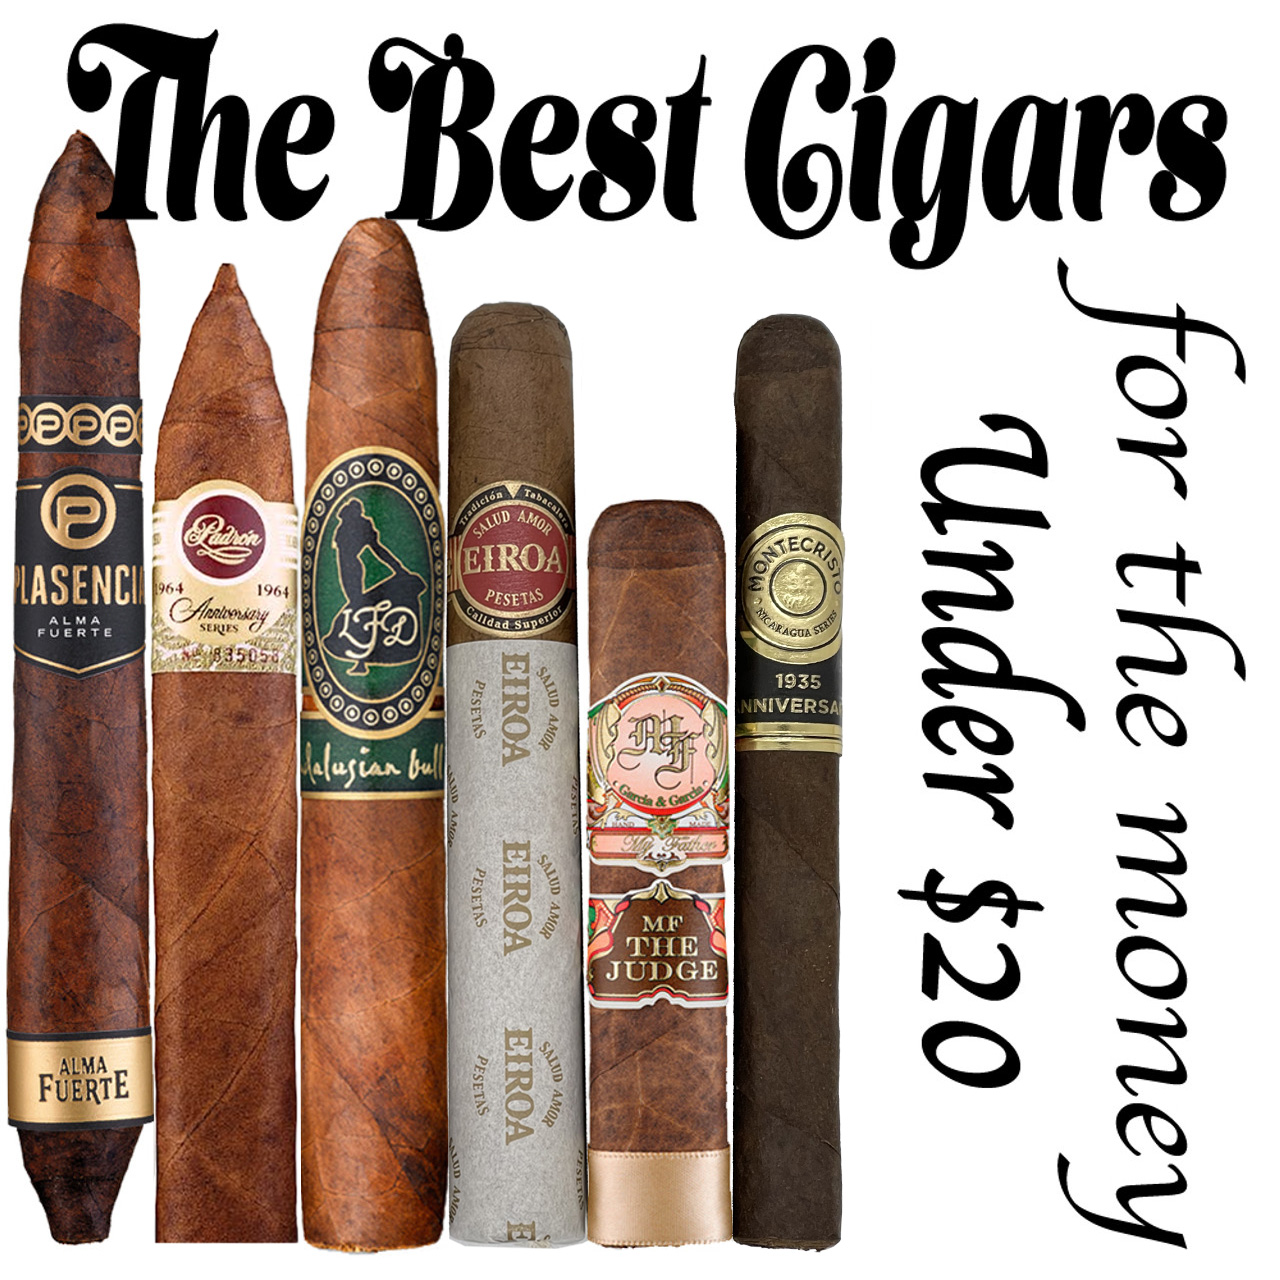 The Best Affordable Cigars for Under $10